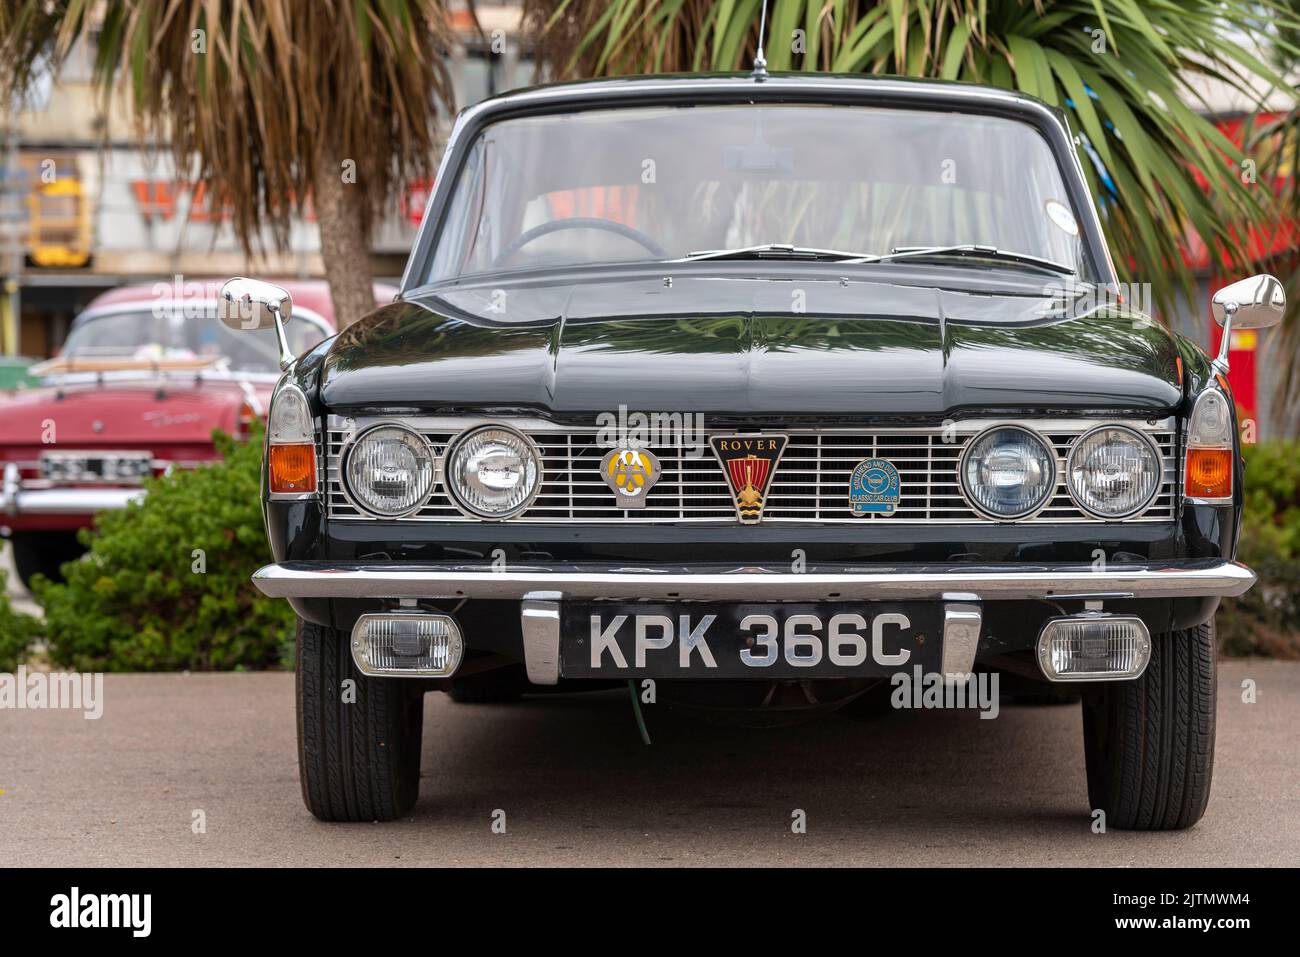 1965 Rover P6, Rover 2000 saloon car on show on Marine Parade, Southend on Sea, Essex, UK. Front grill with vintage AA badge. Rover logo Stock Photo